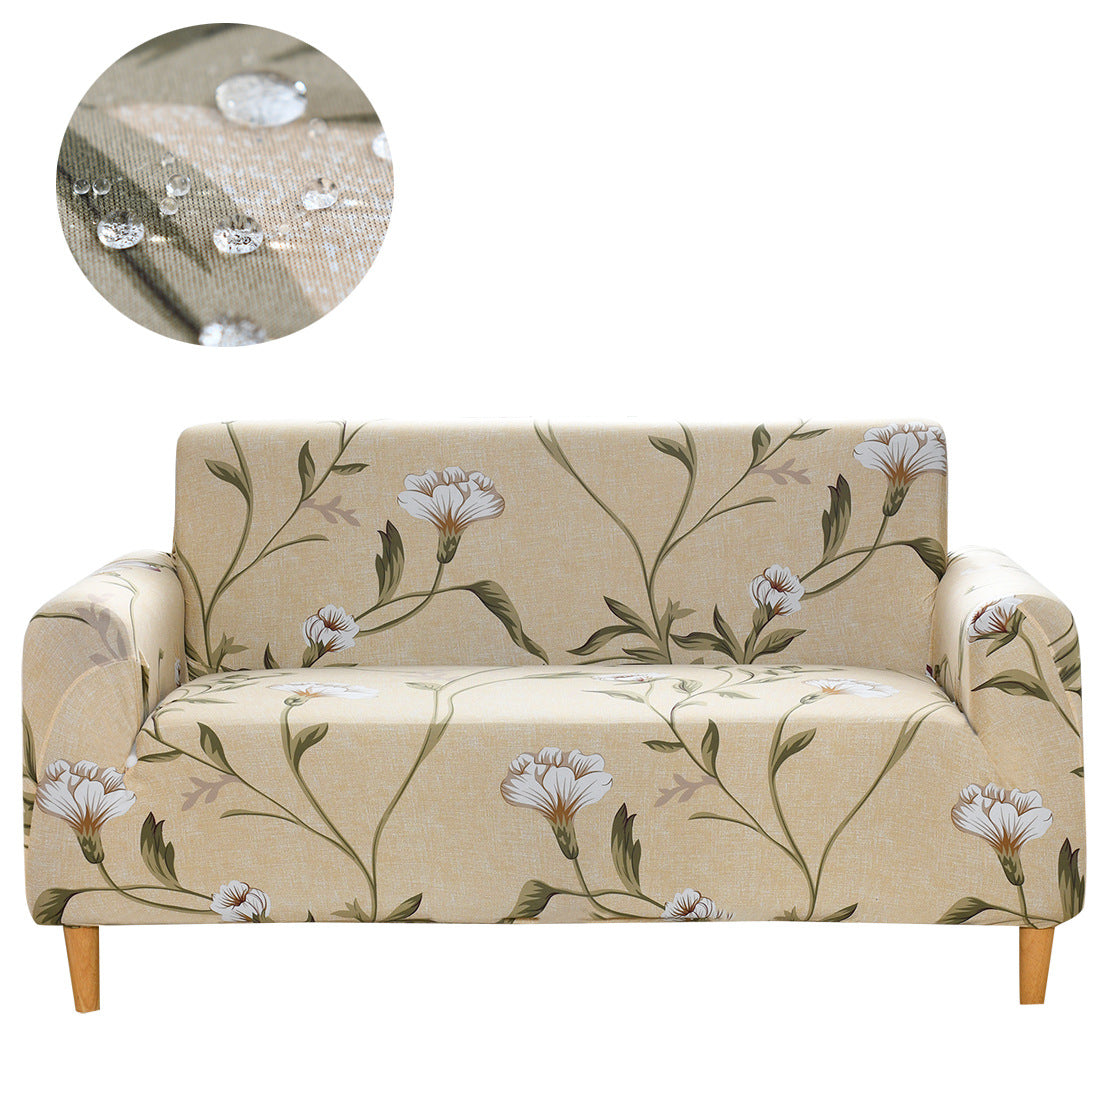 White fowers with brown leafes in beige background HomeStyle sofa cover